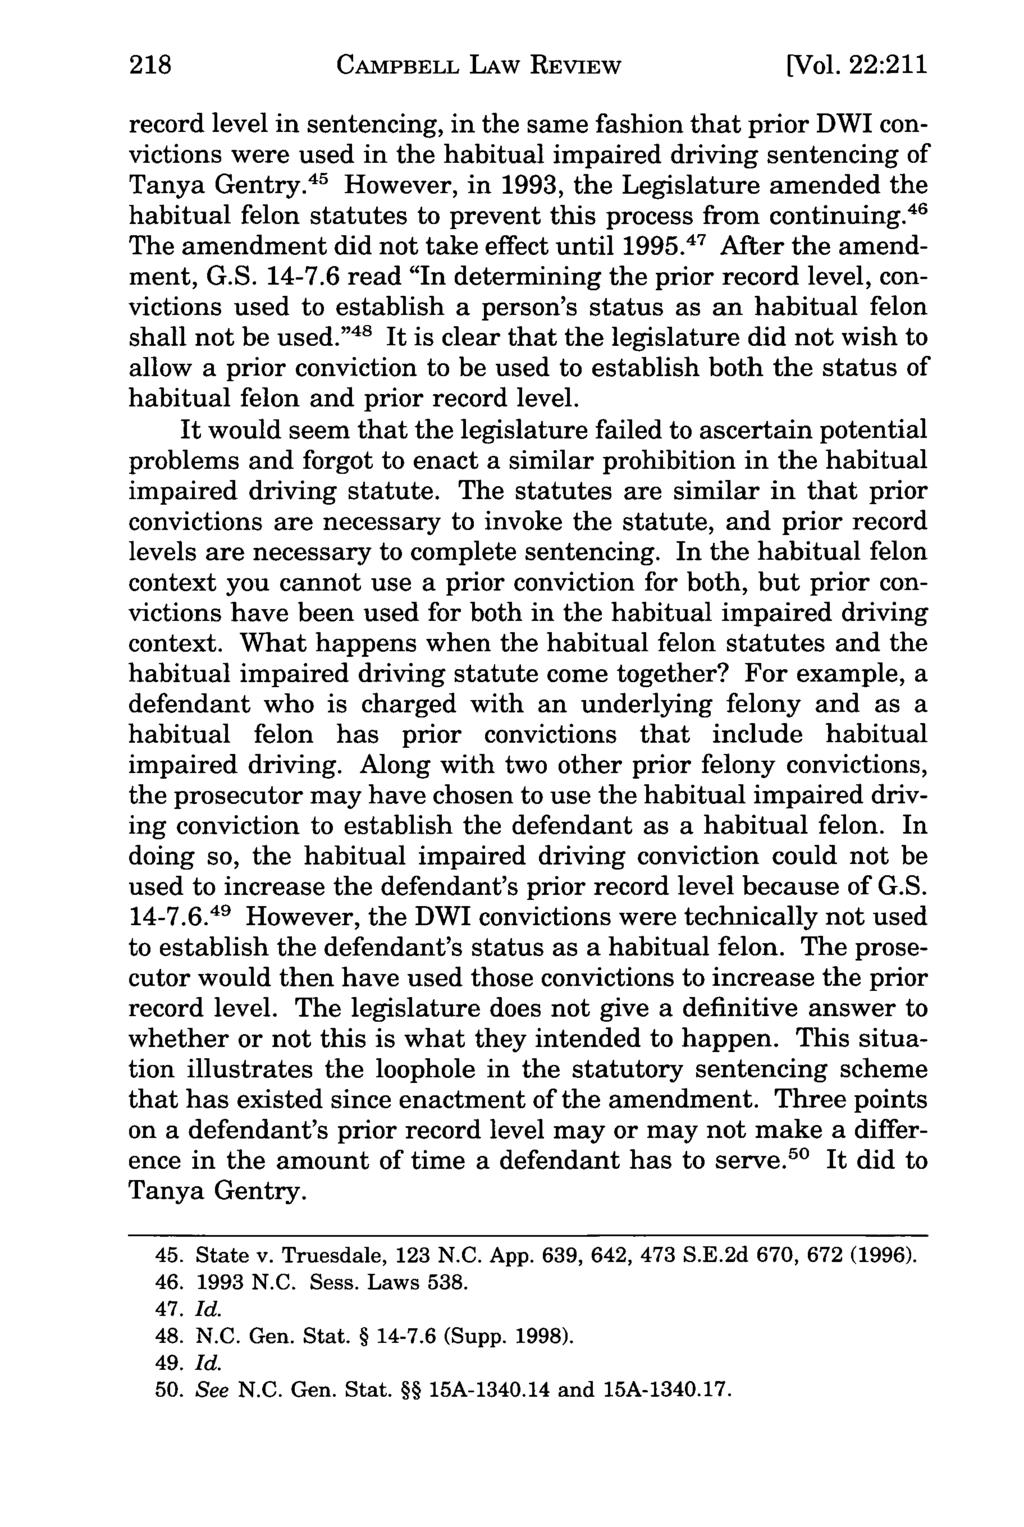 Campbell Law Review, Vol. 22, Iss. 1 [1999], Art. 7 CAMPBELL LAW REVIEW [Vol.